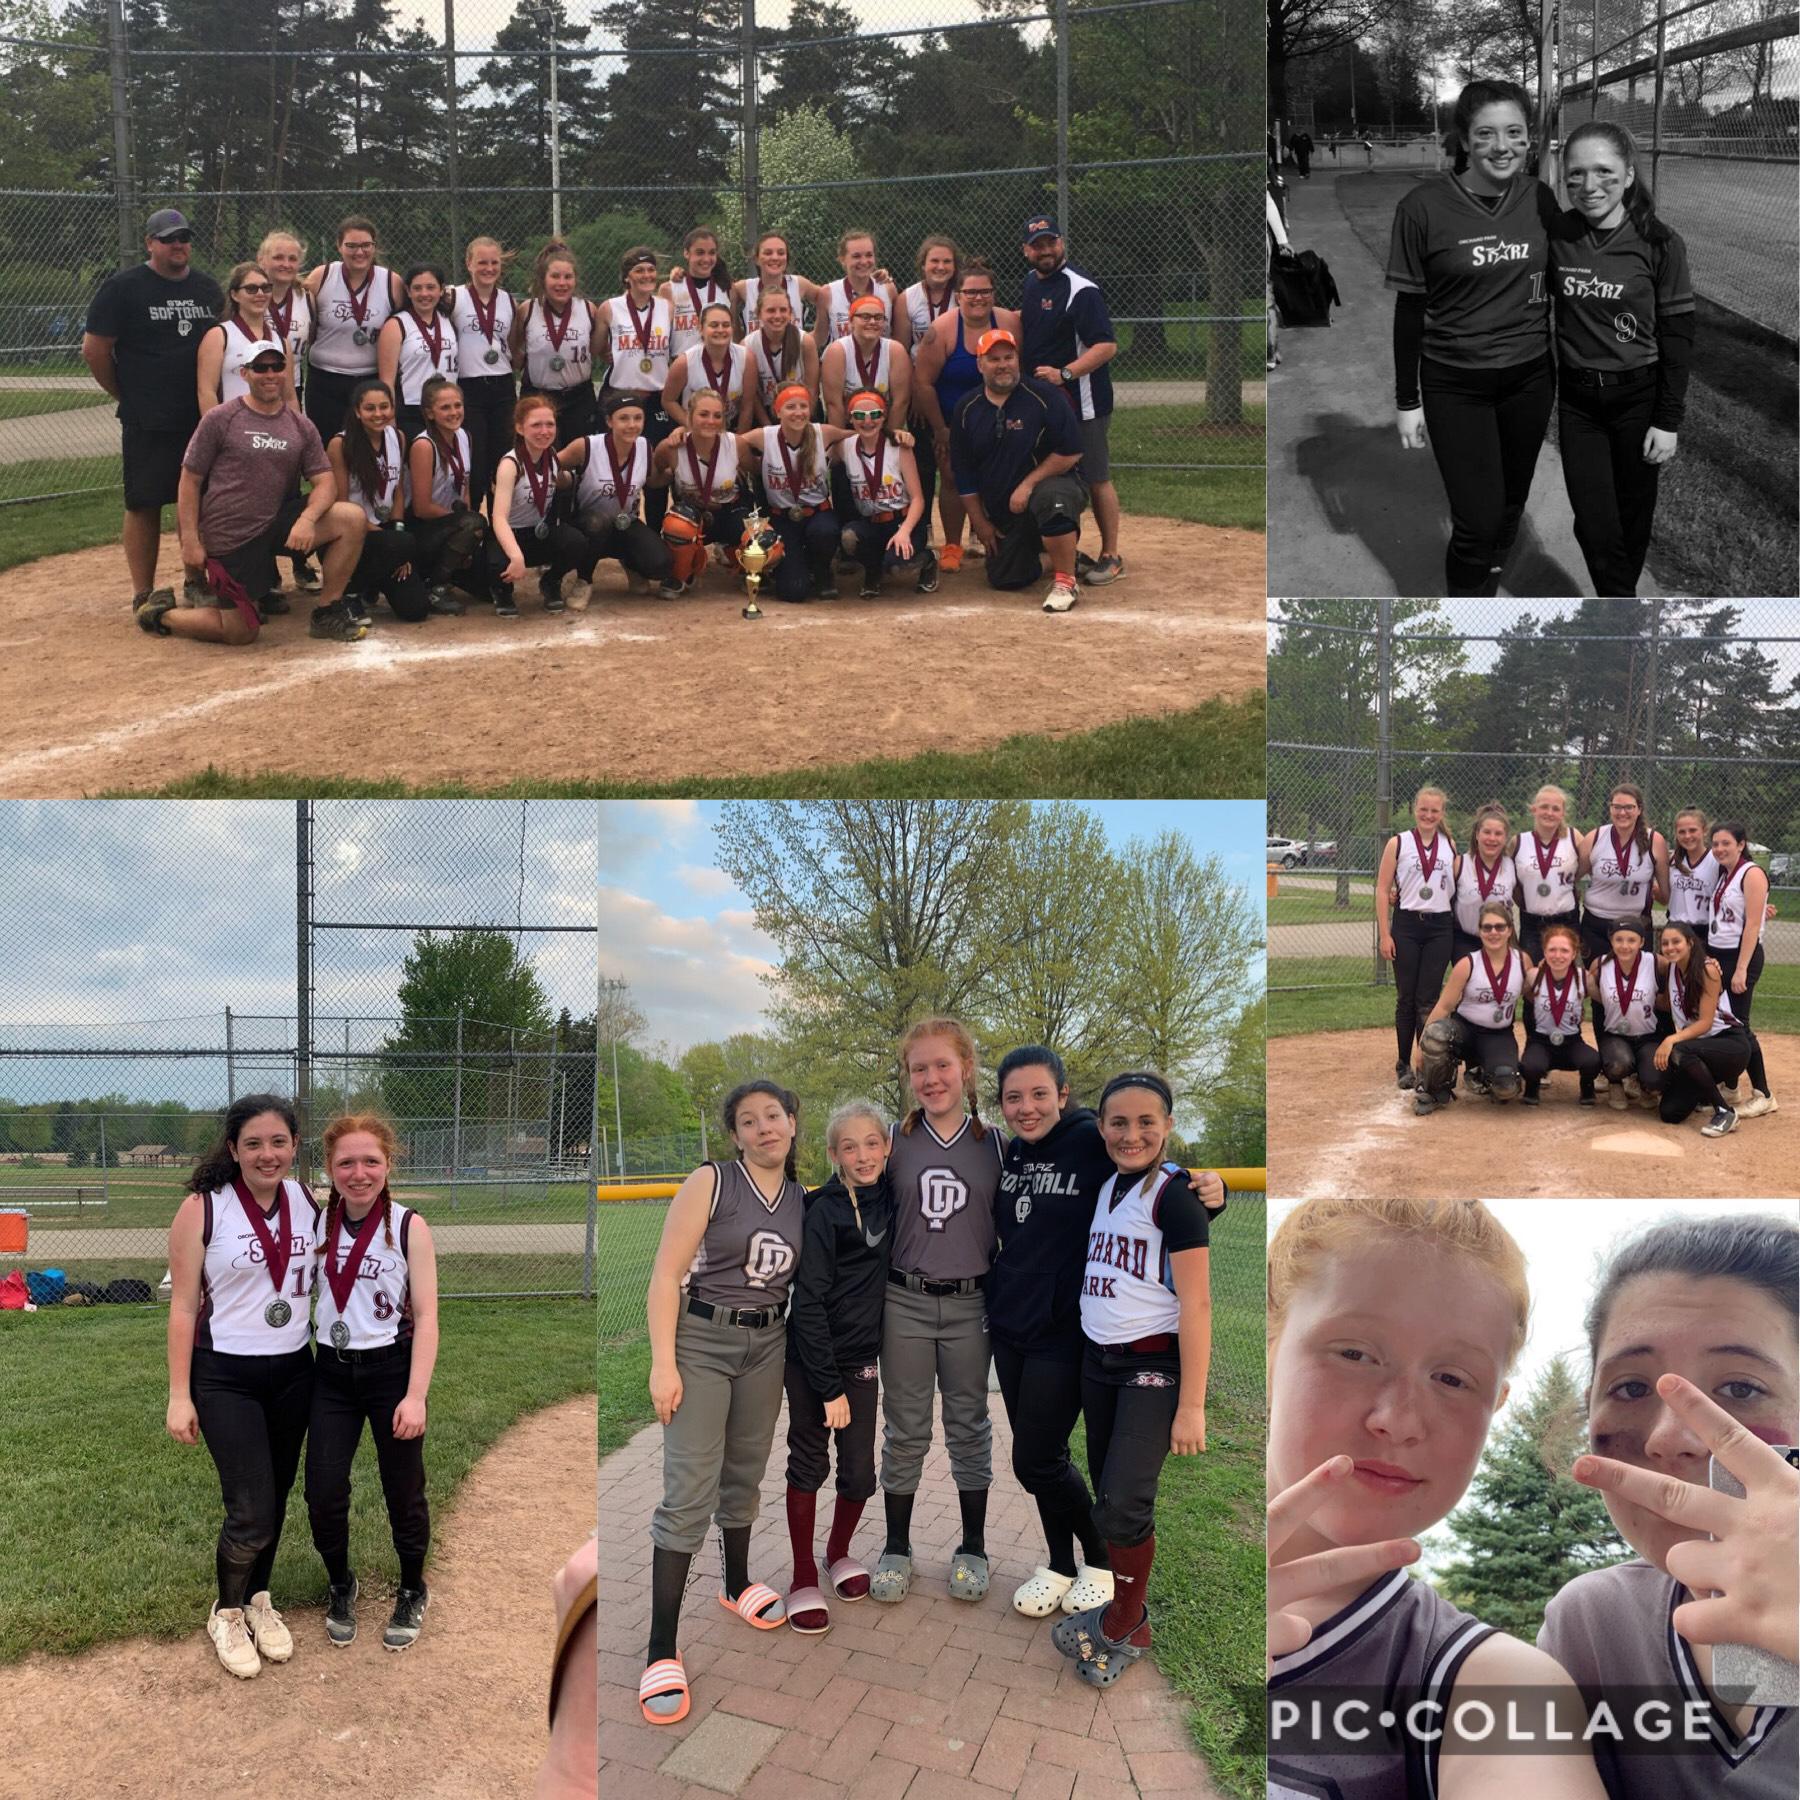 2nd place 14u silver division🔥 1st tournament of the season🥎great way to start off the year❤️ never thought we would get this far together🥰